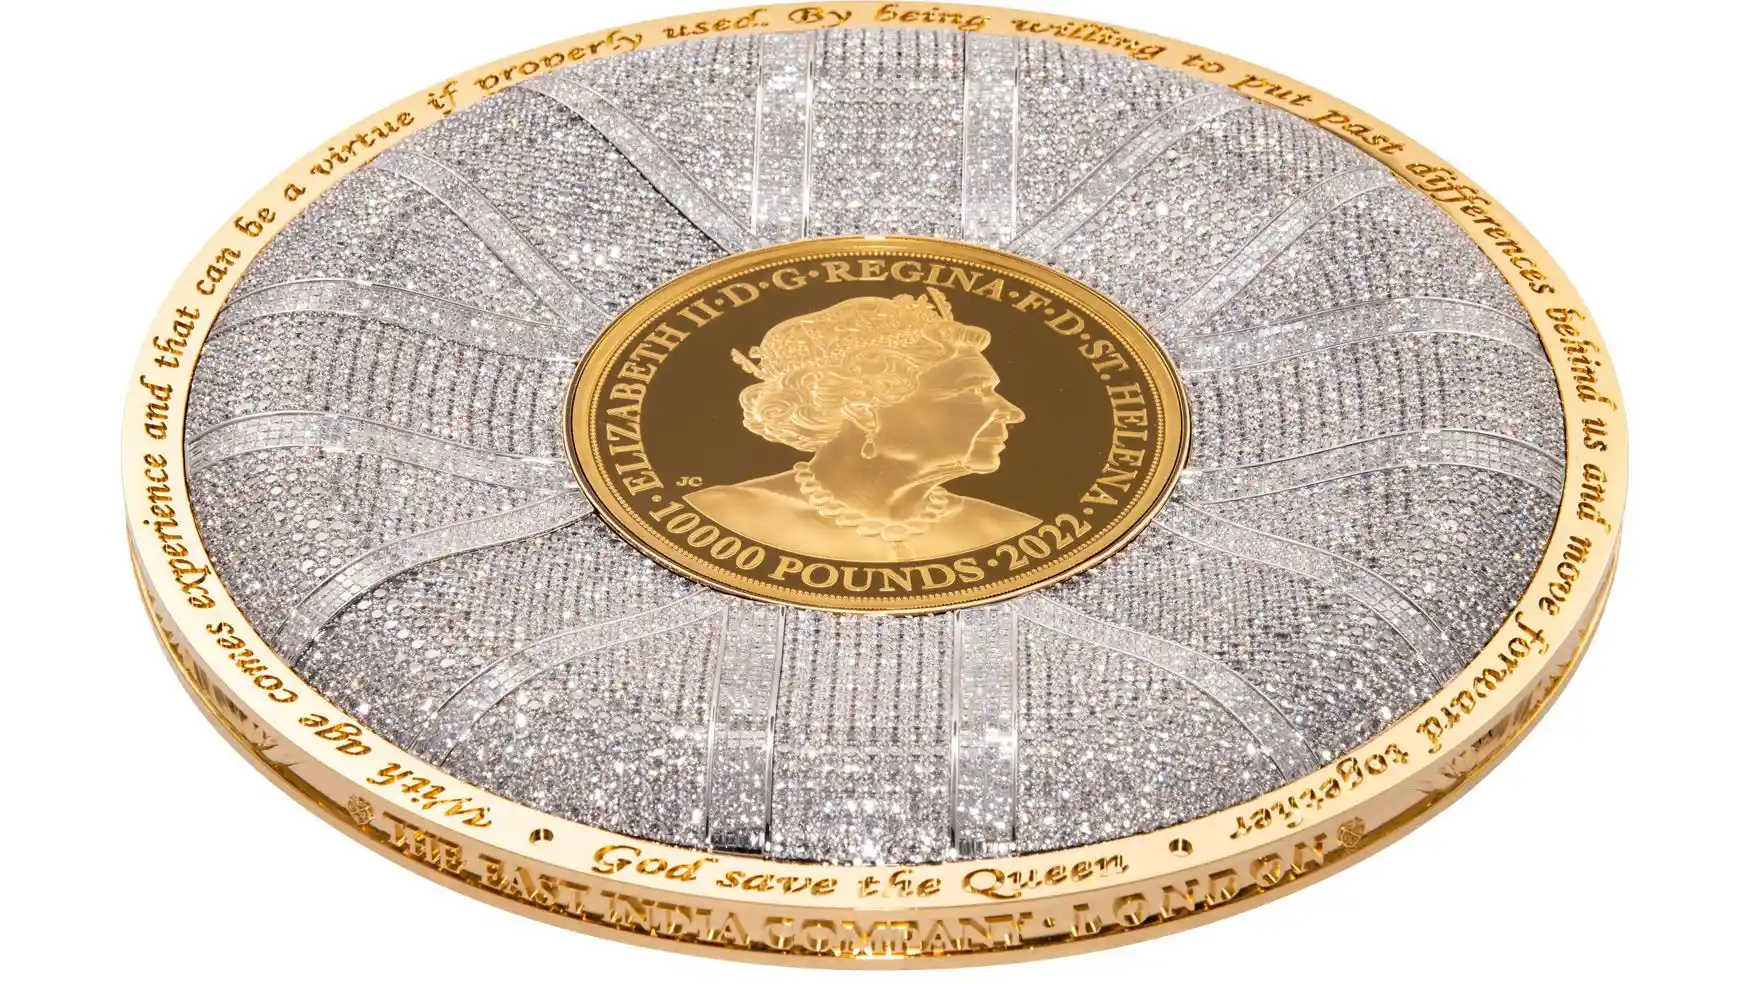 A 3 kg gold coin with diamonds has been prepared on the anniversary of the Queen of Great Britain